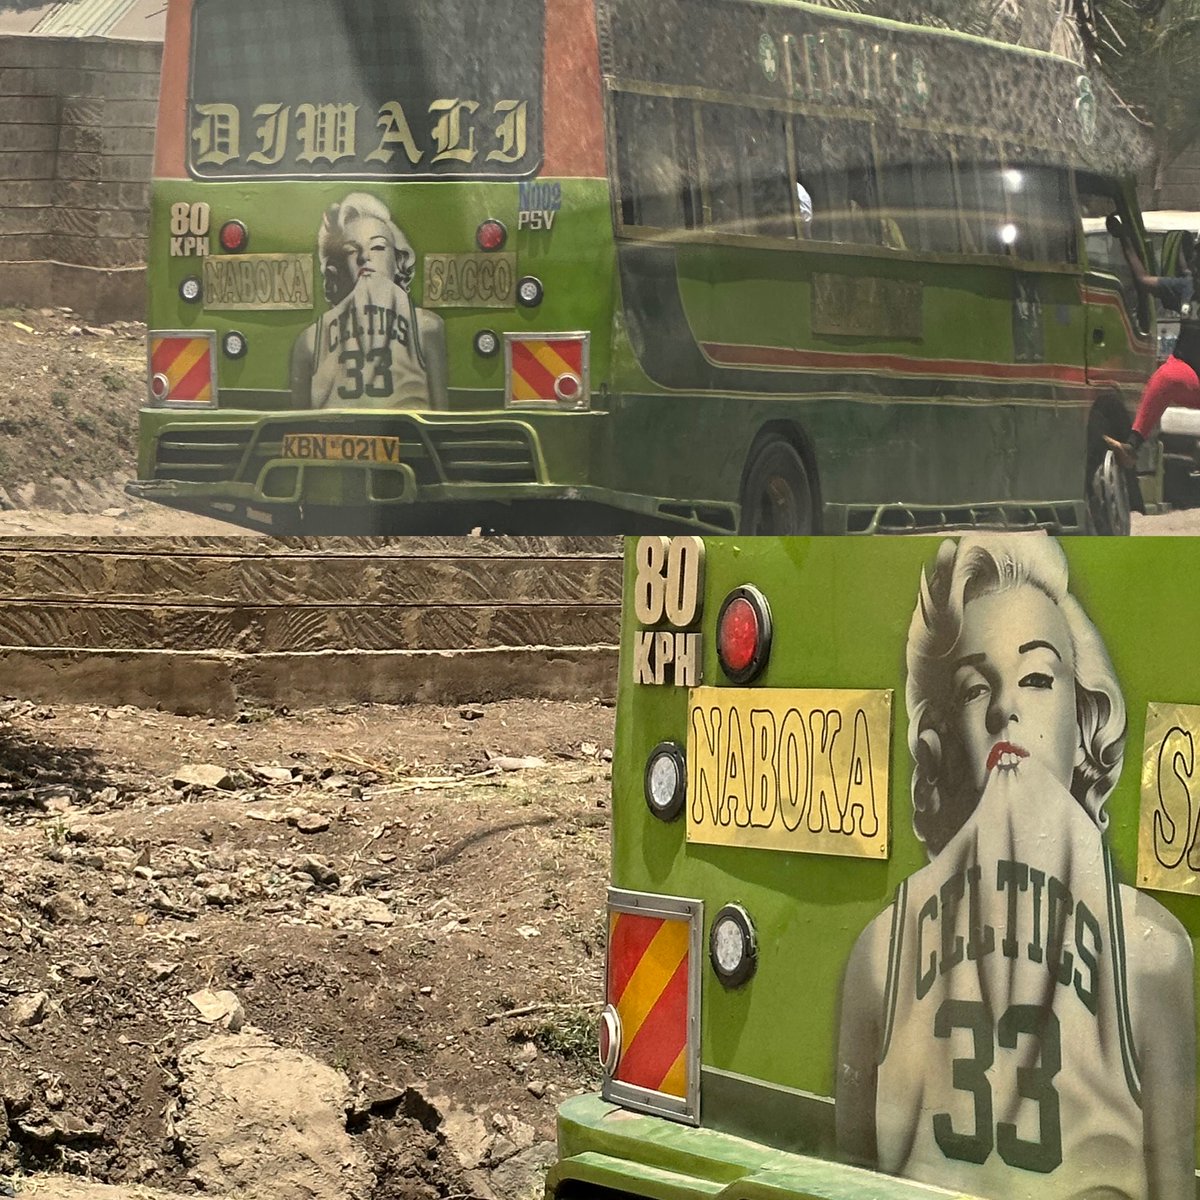 Oh nothing, except for Marilyn Monroe wearing a Larry Bird jersey on the back of a Celtics-themed bus in Nairobi, Kenya.